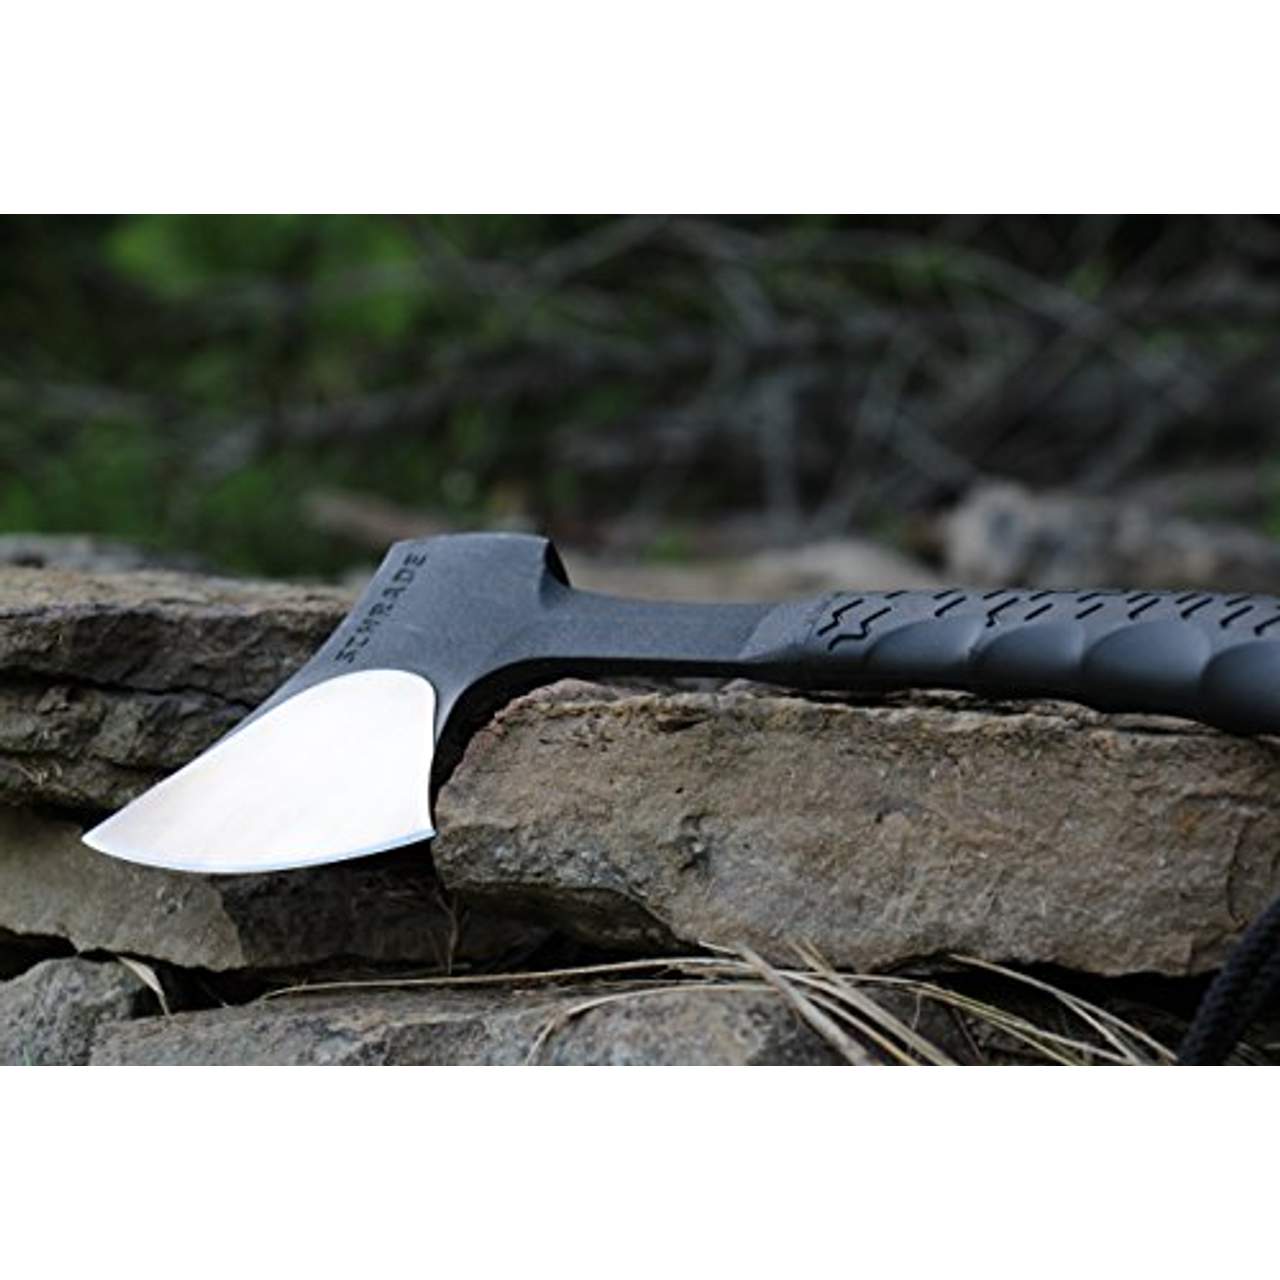 Schrade 0 SCAXE10 Full Tang Hatchet by